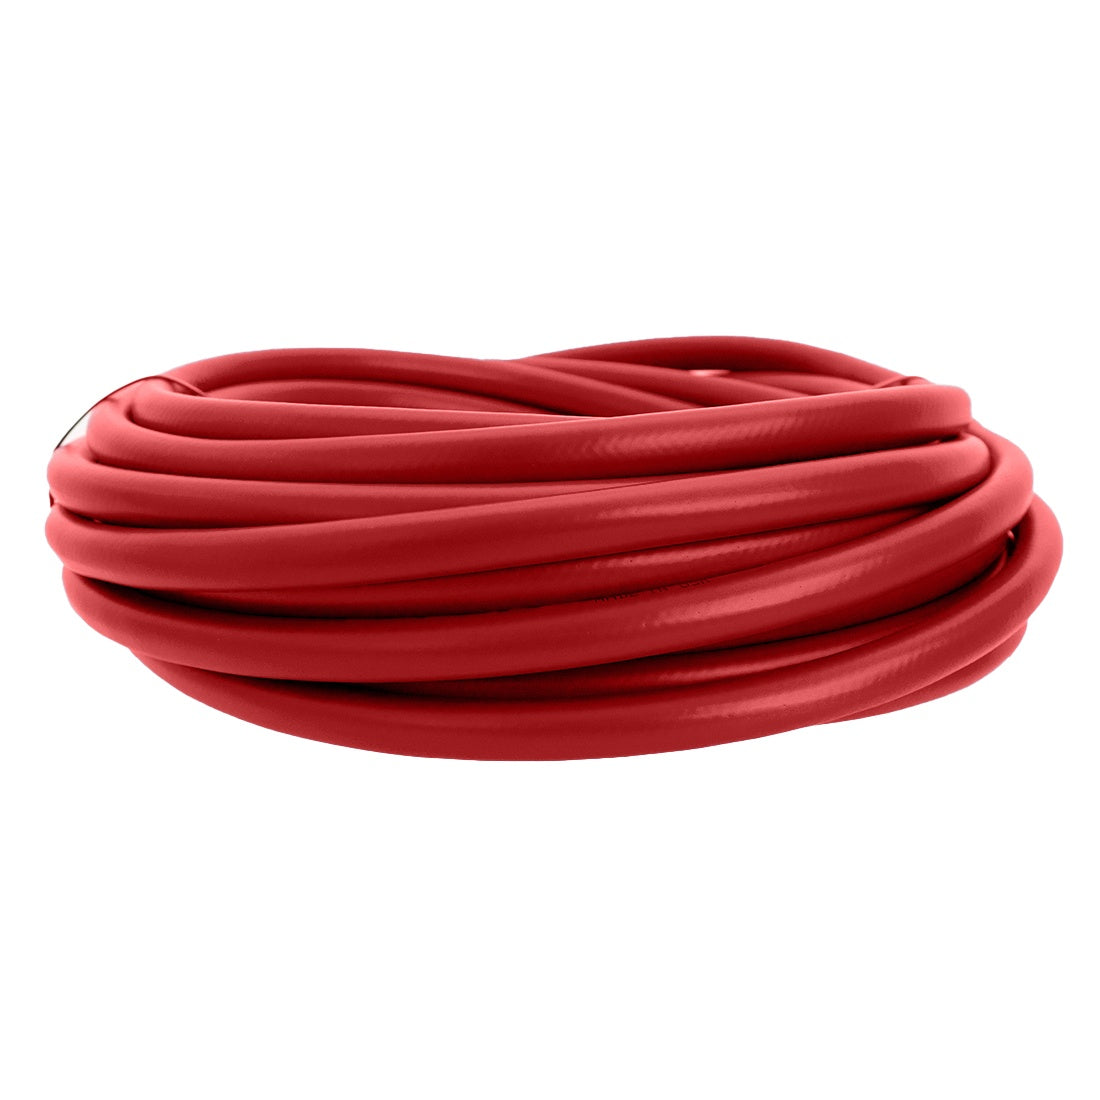 XERO Rubber Hose - 3/8 Inch Red Back View